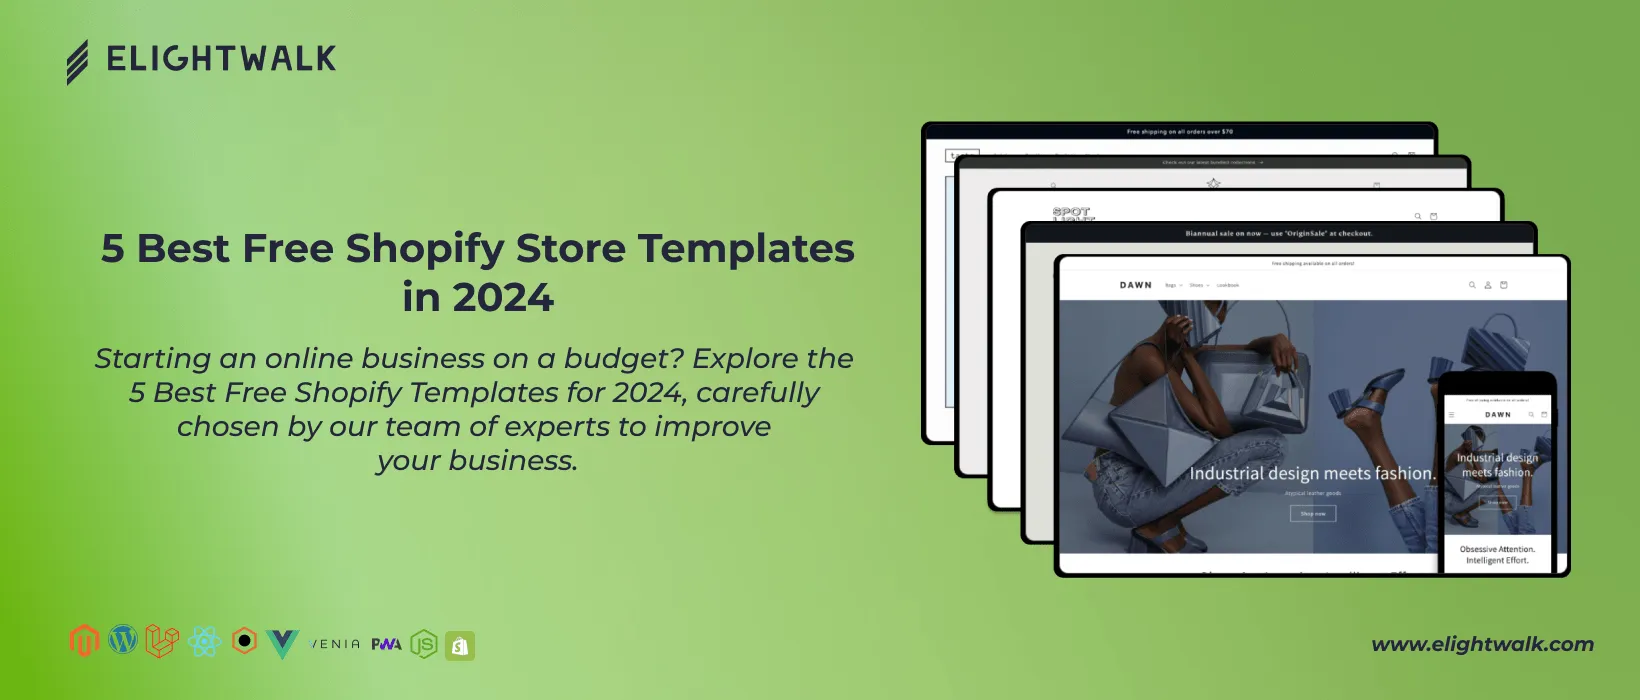 Free shopify store templates 